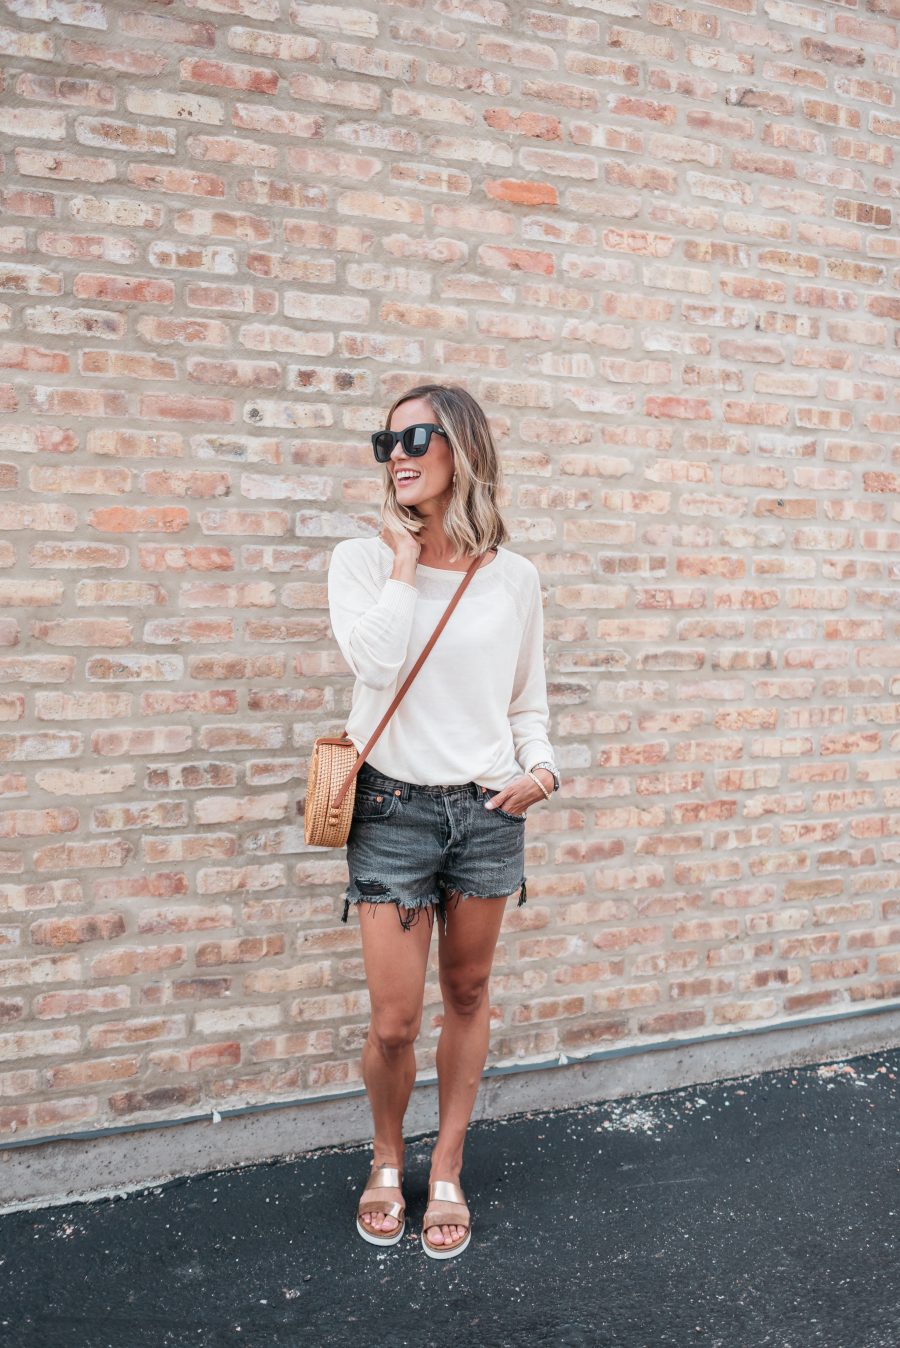 White long sleeve tee, black cut offs, sandals, straw bag, and sunnies